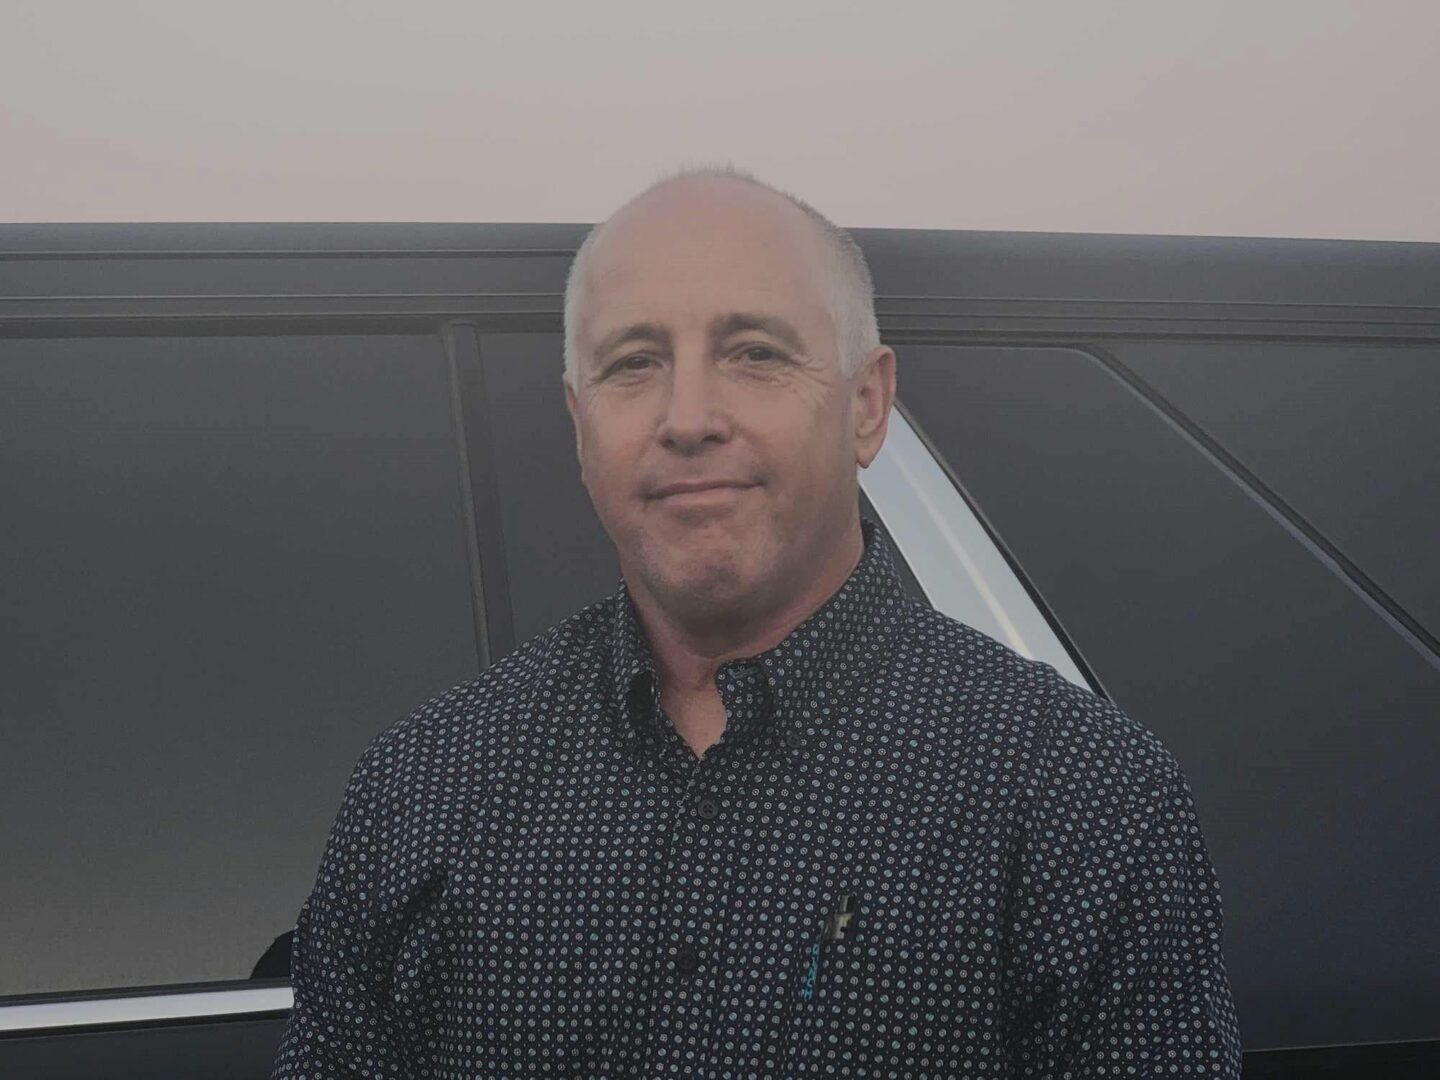 A man in a black shirt is standing next to a car